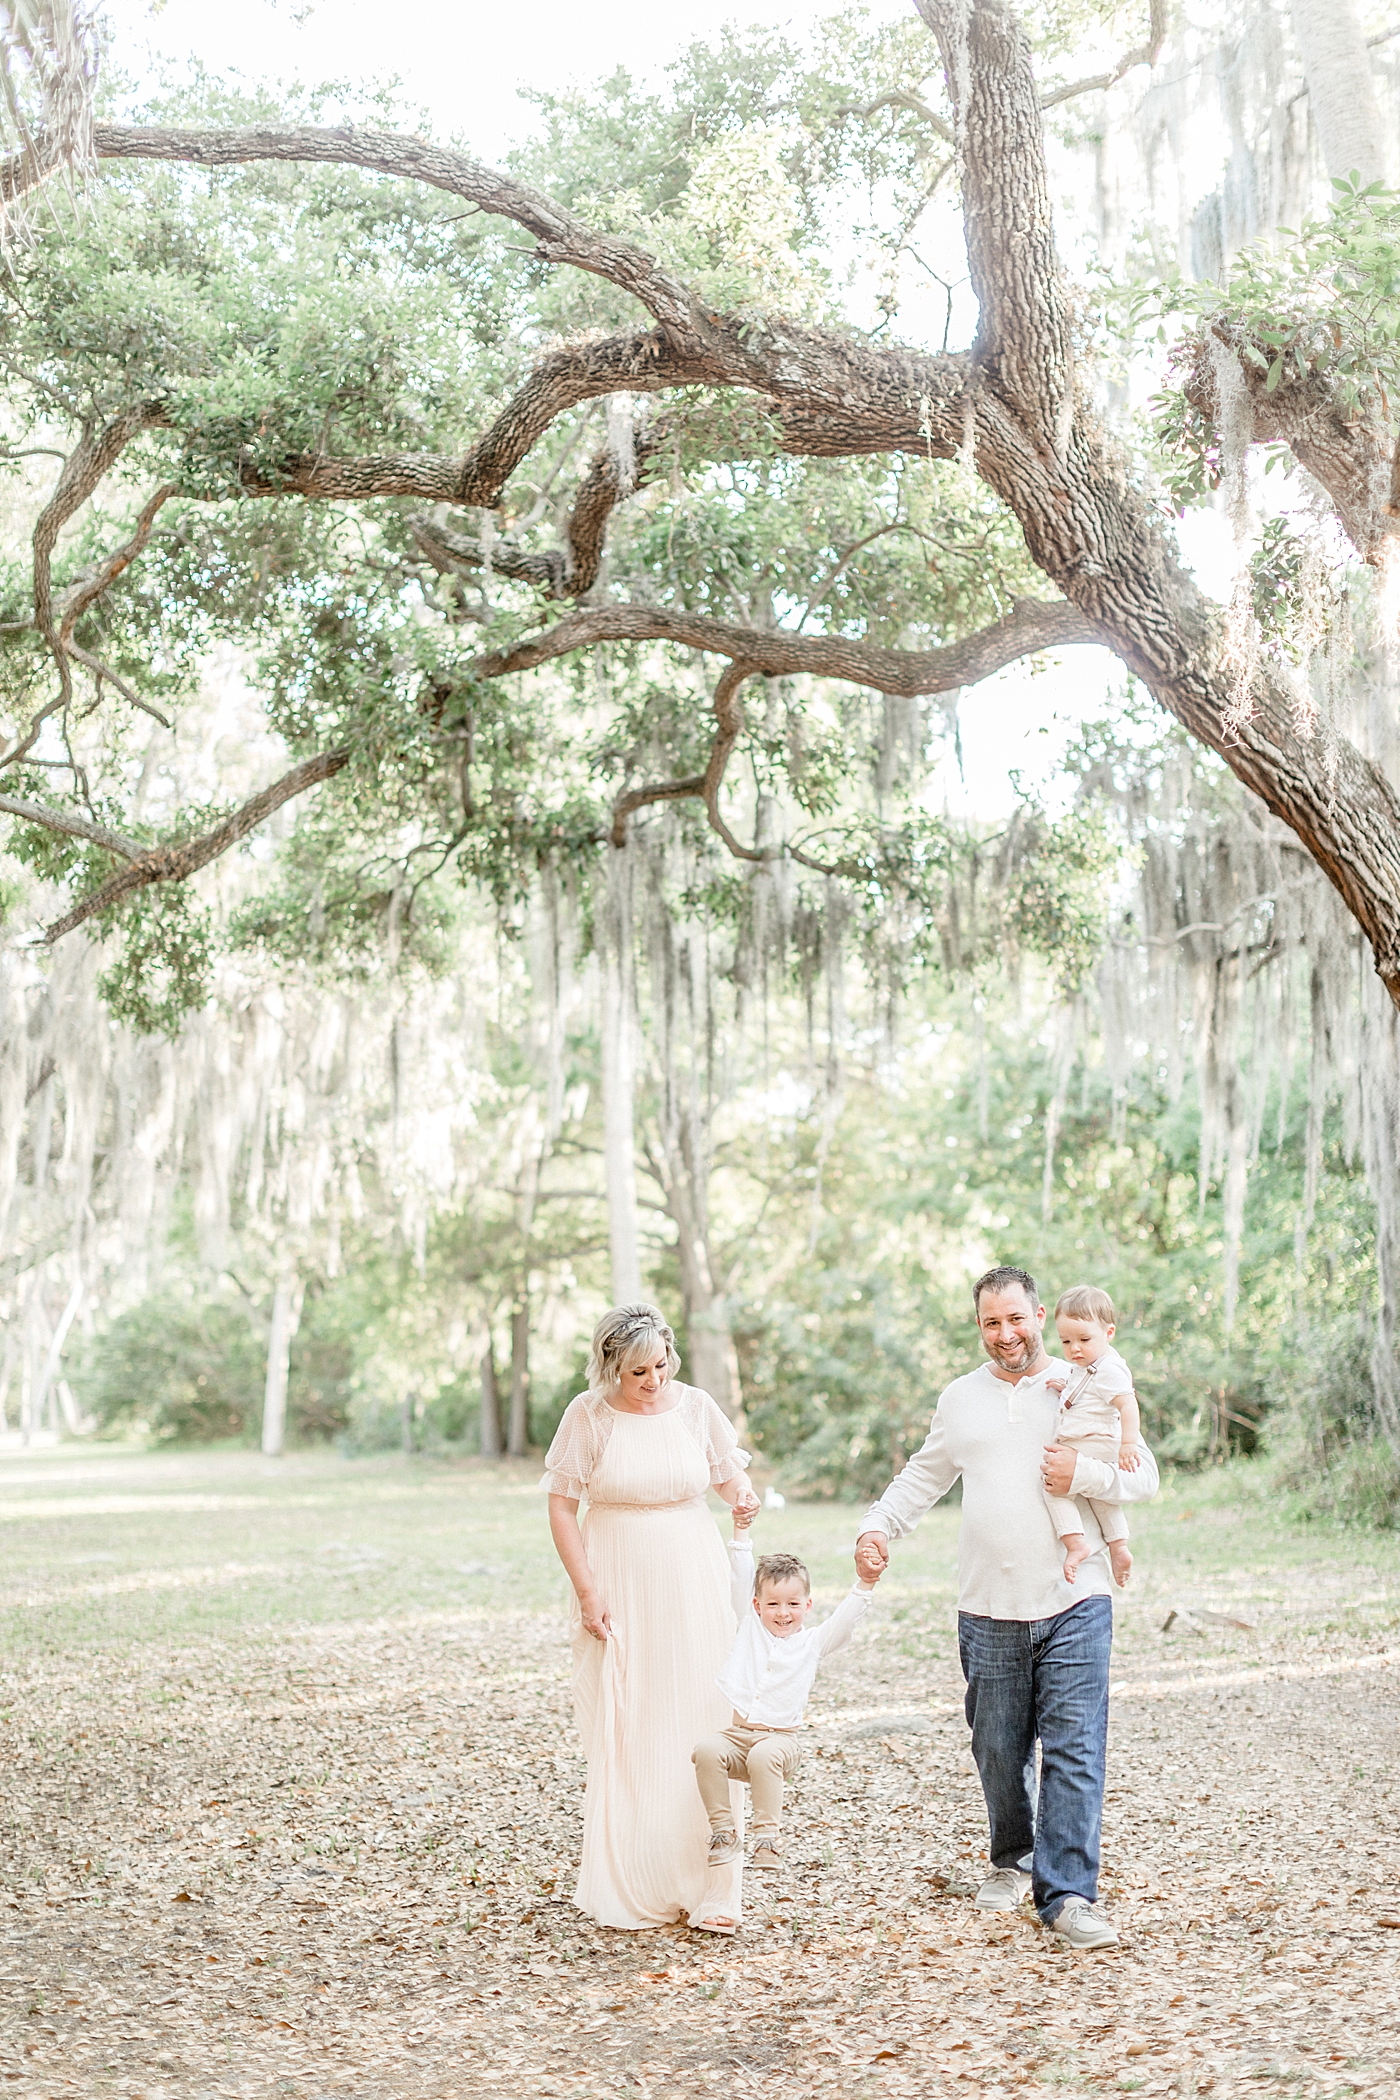 Family walking under Oaks with Spanish Moss. Photo by Brittany Elise Photography.